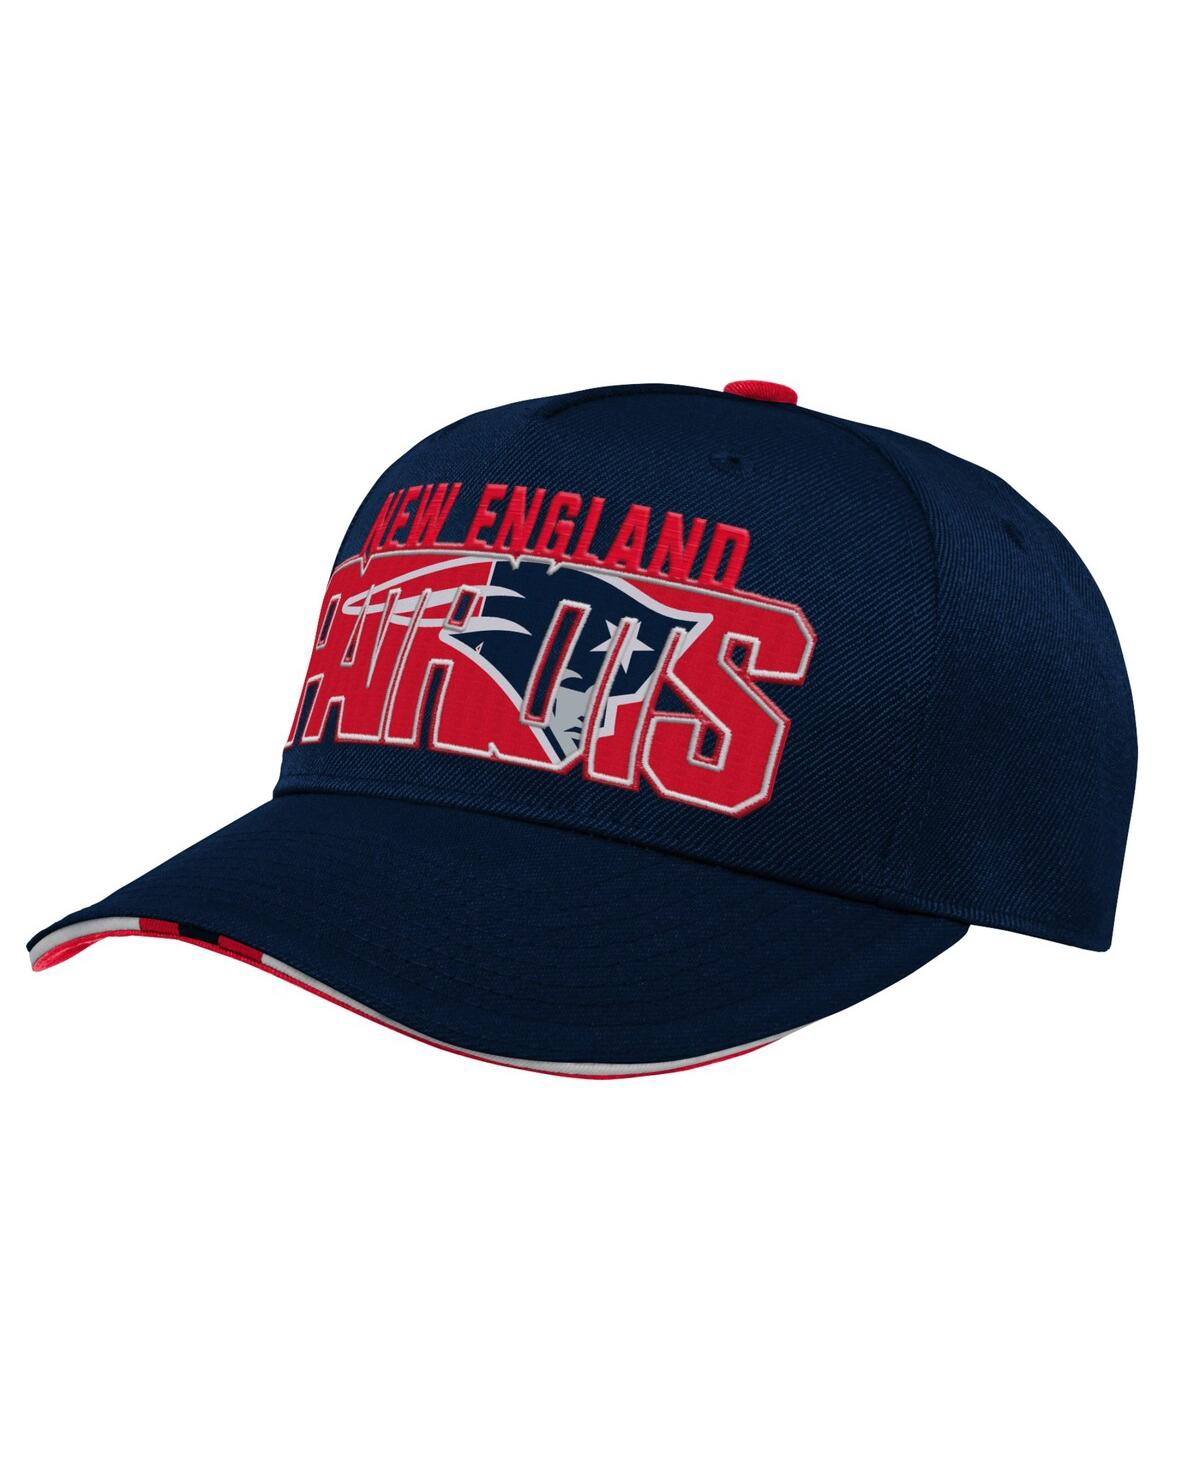 Outerstuff Kids' Big Boys And Girls Navy New England Patriots On Trend Precurved A-frame Snapback Hat